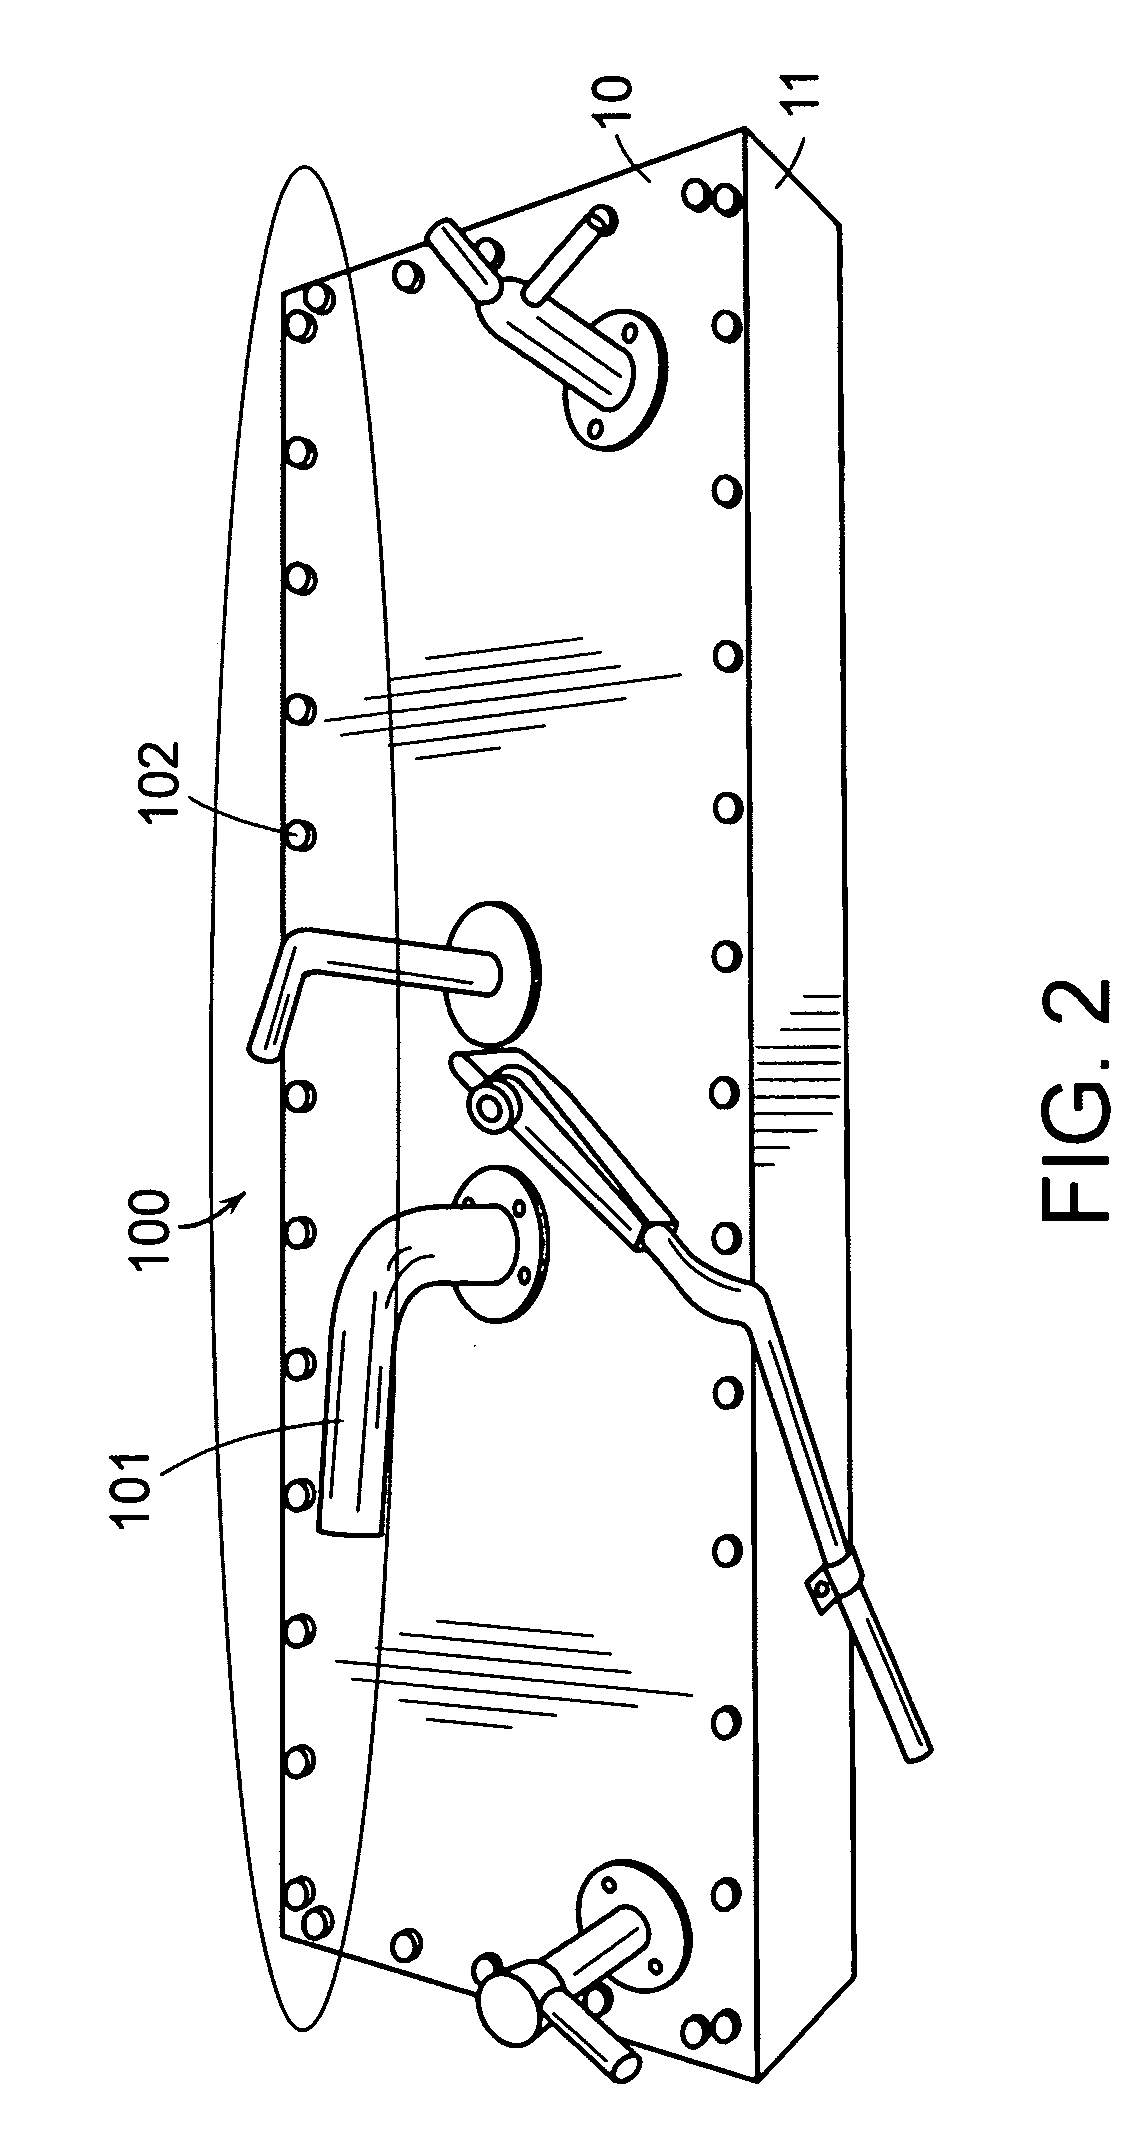 Coolant reservoir tank for fuel cell vehicle